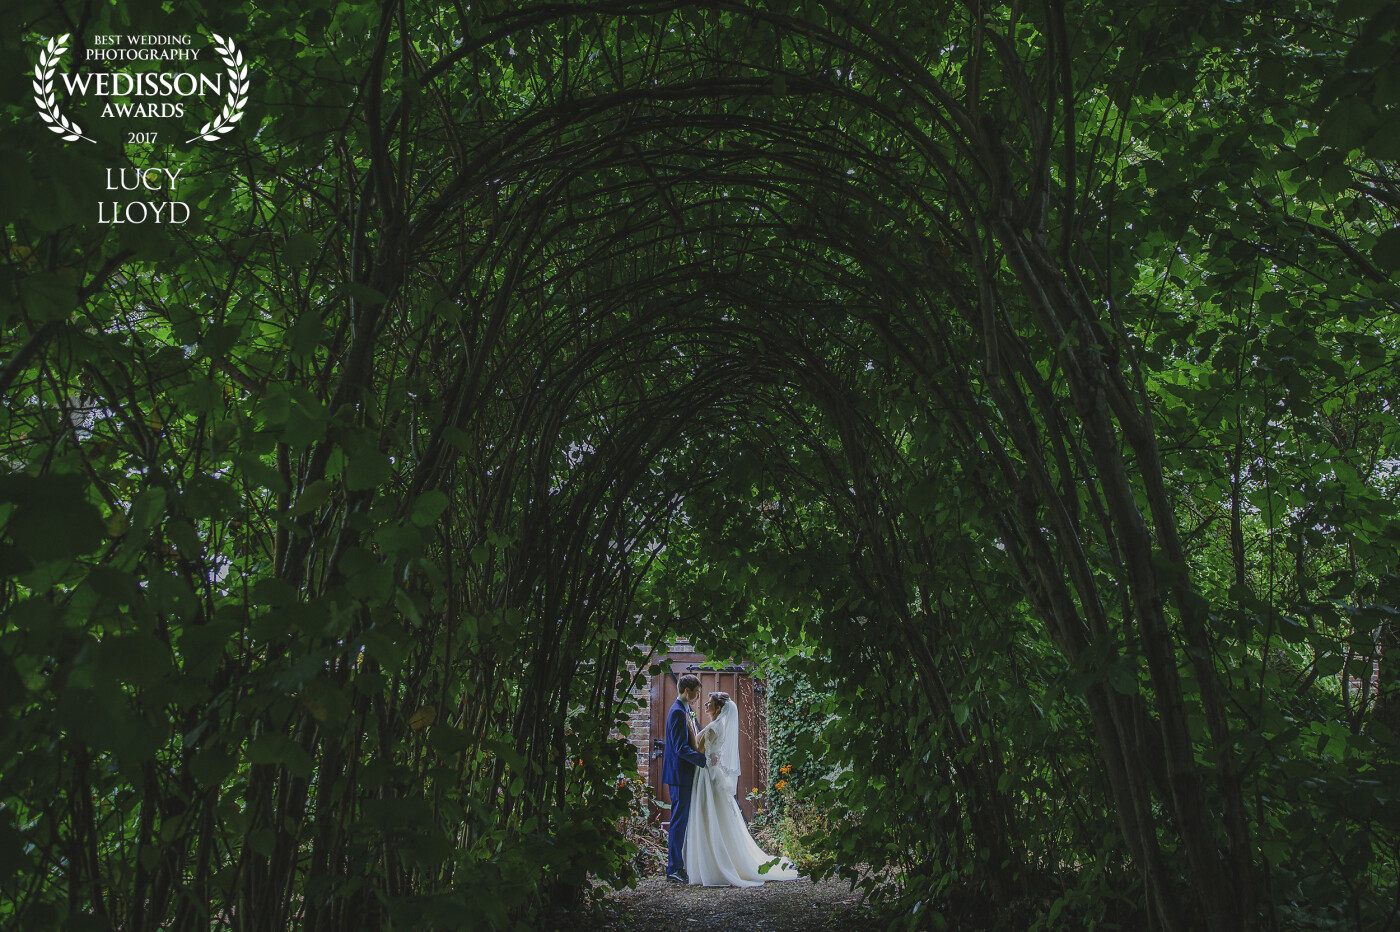 This photo was captured during a lovely wedding at Madingley Hall, Cambridge. This was one of my favourite weddings.  The gardens of Madingley were really beautiful plus there was this long arch way of trees which I was really excited to include in the portrait photos.  Jonathon and Negin were amazing to photograph. They were so happy together, which really shone through in the photos. 